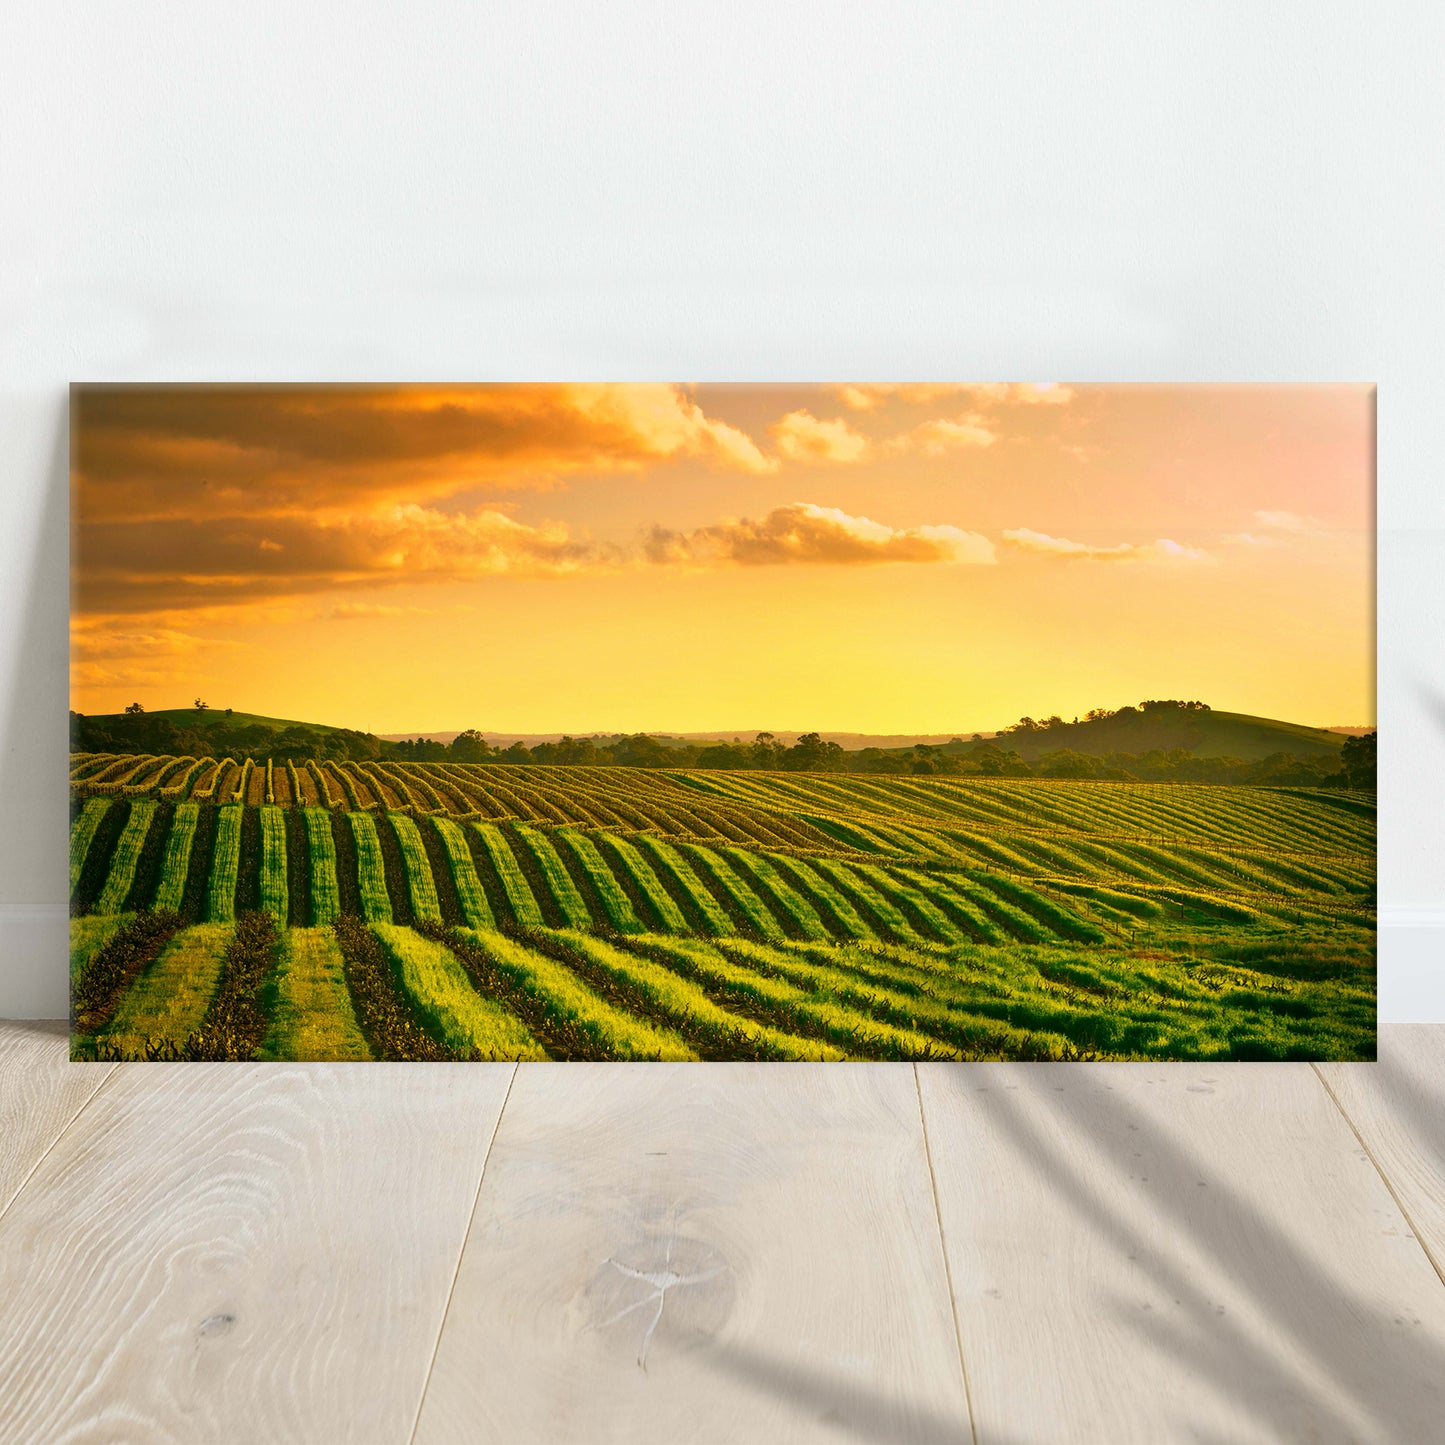 Sunset In Barossa Vineyard Canvas Wall Art - Image by Tailored Canvases